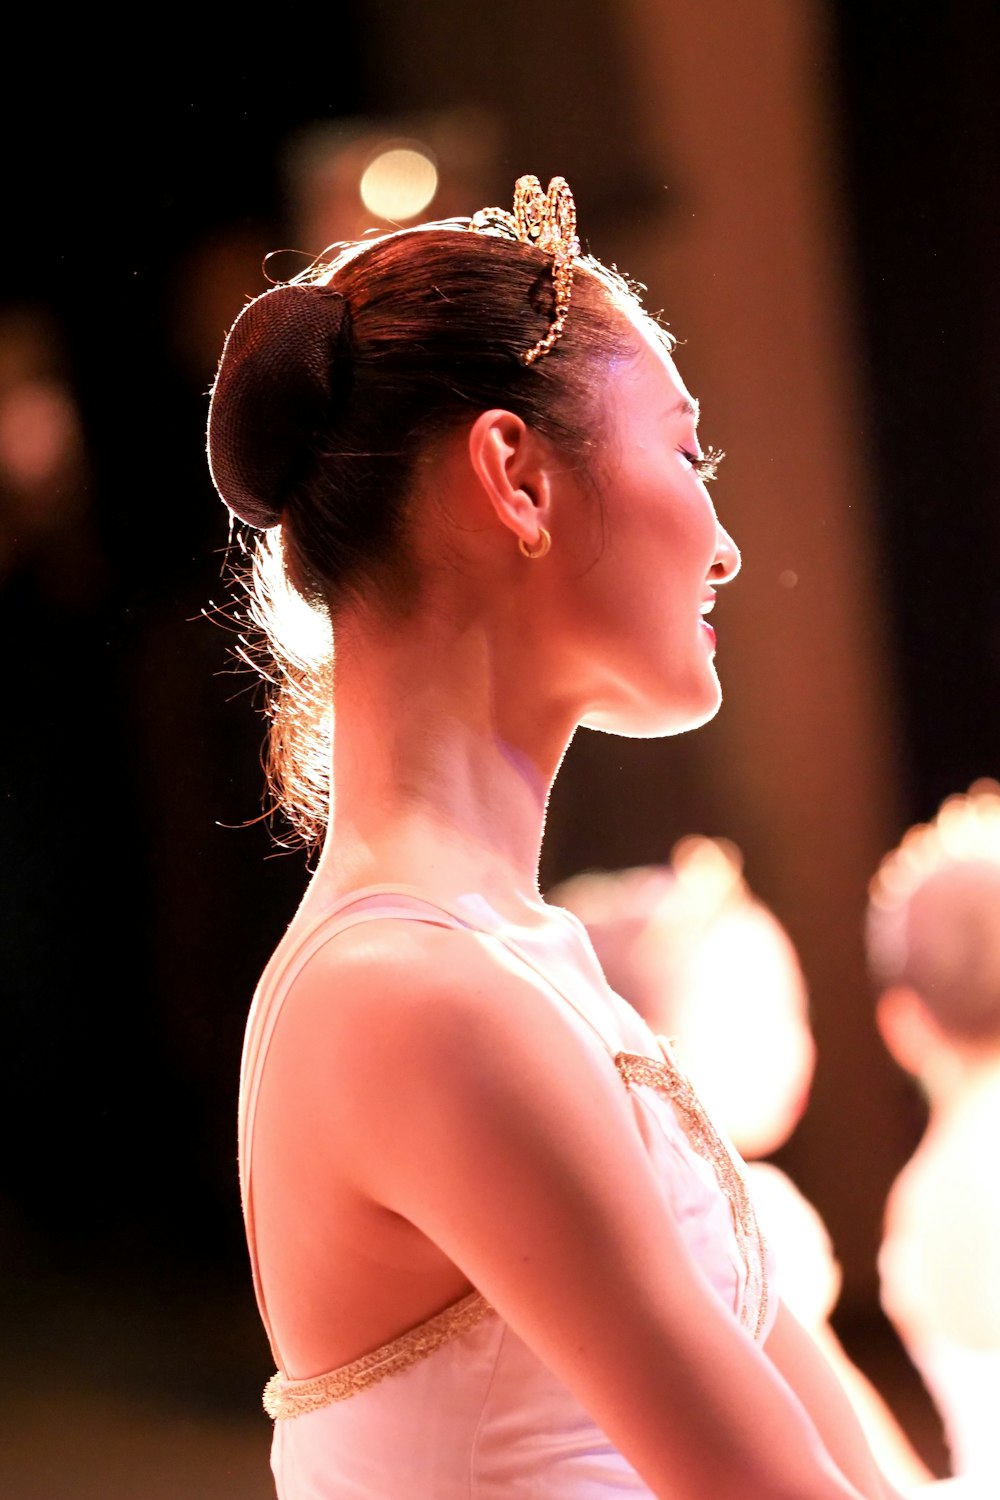 a woman in a white dress is looking away from the camera